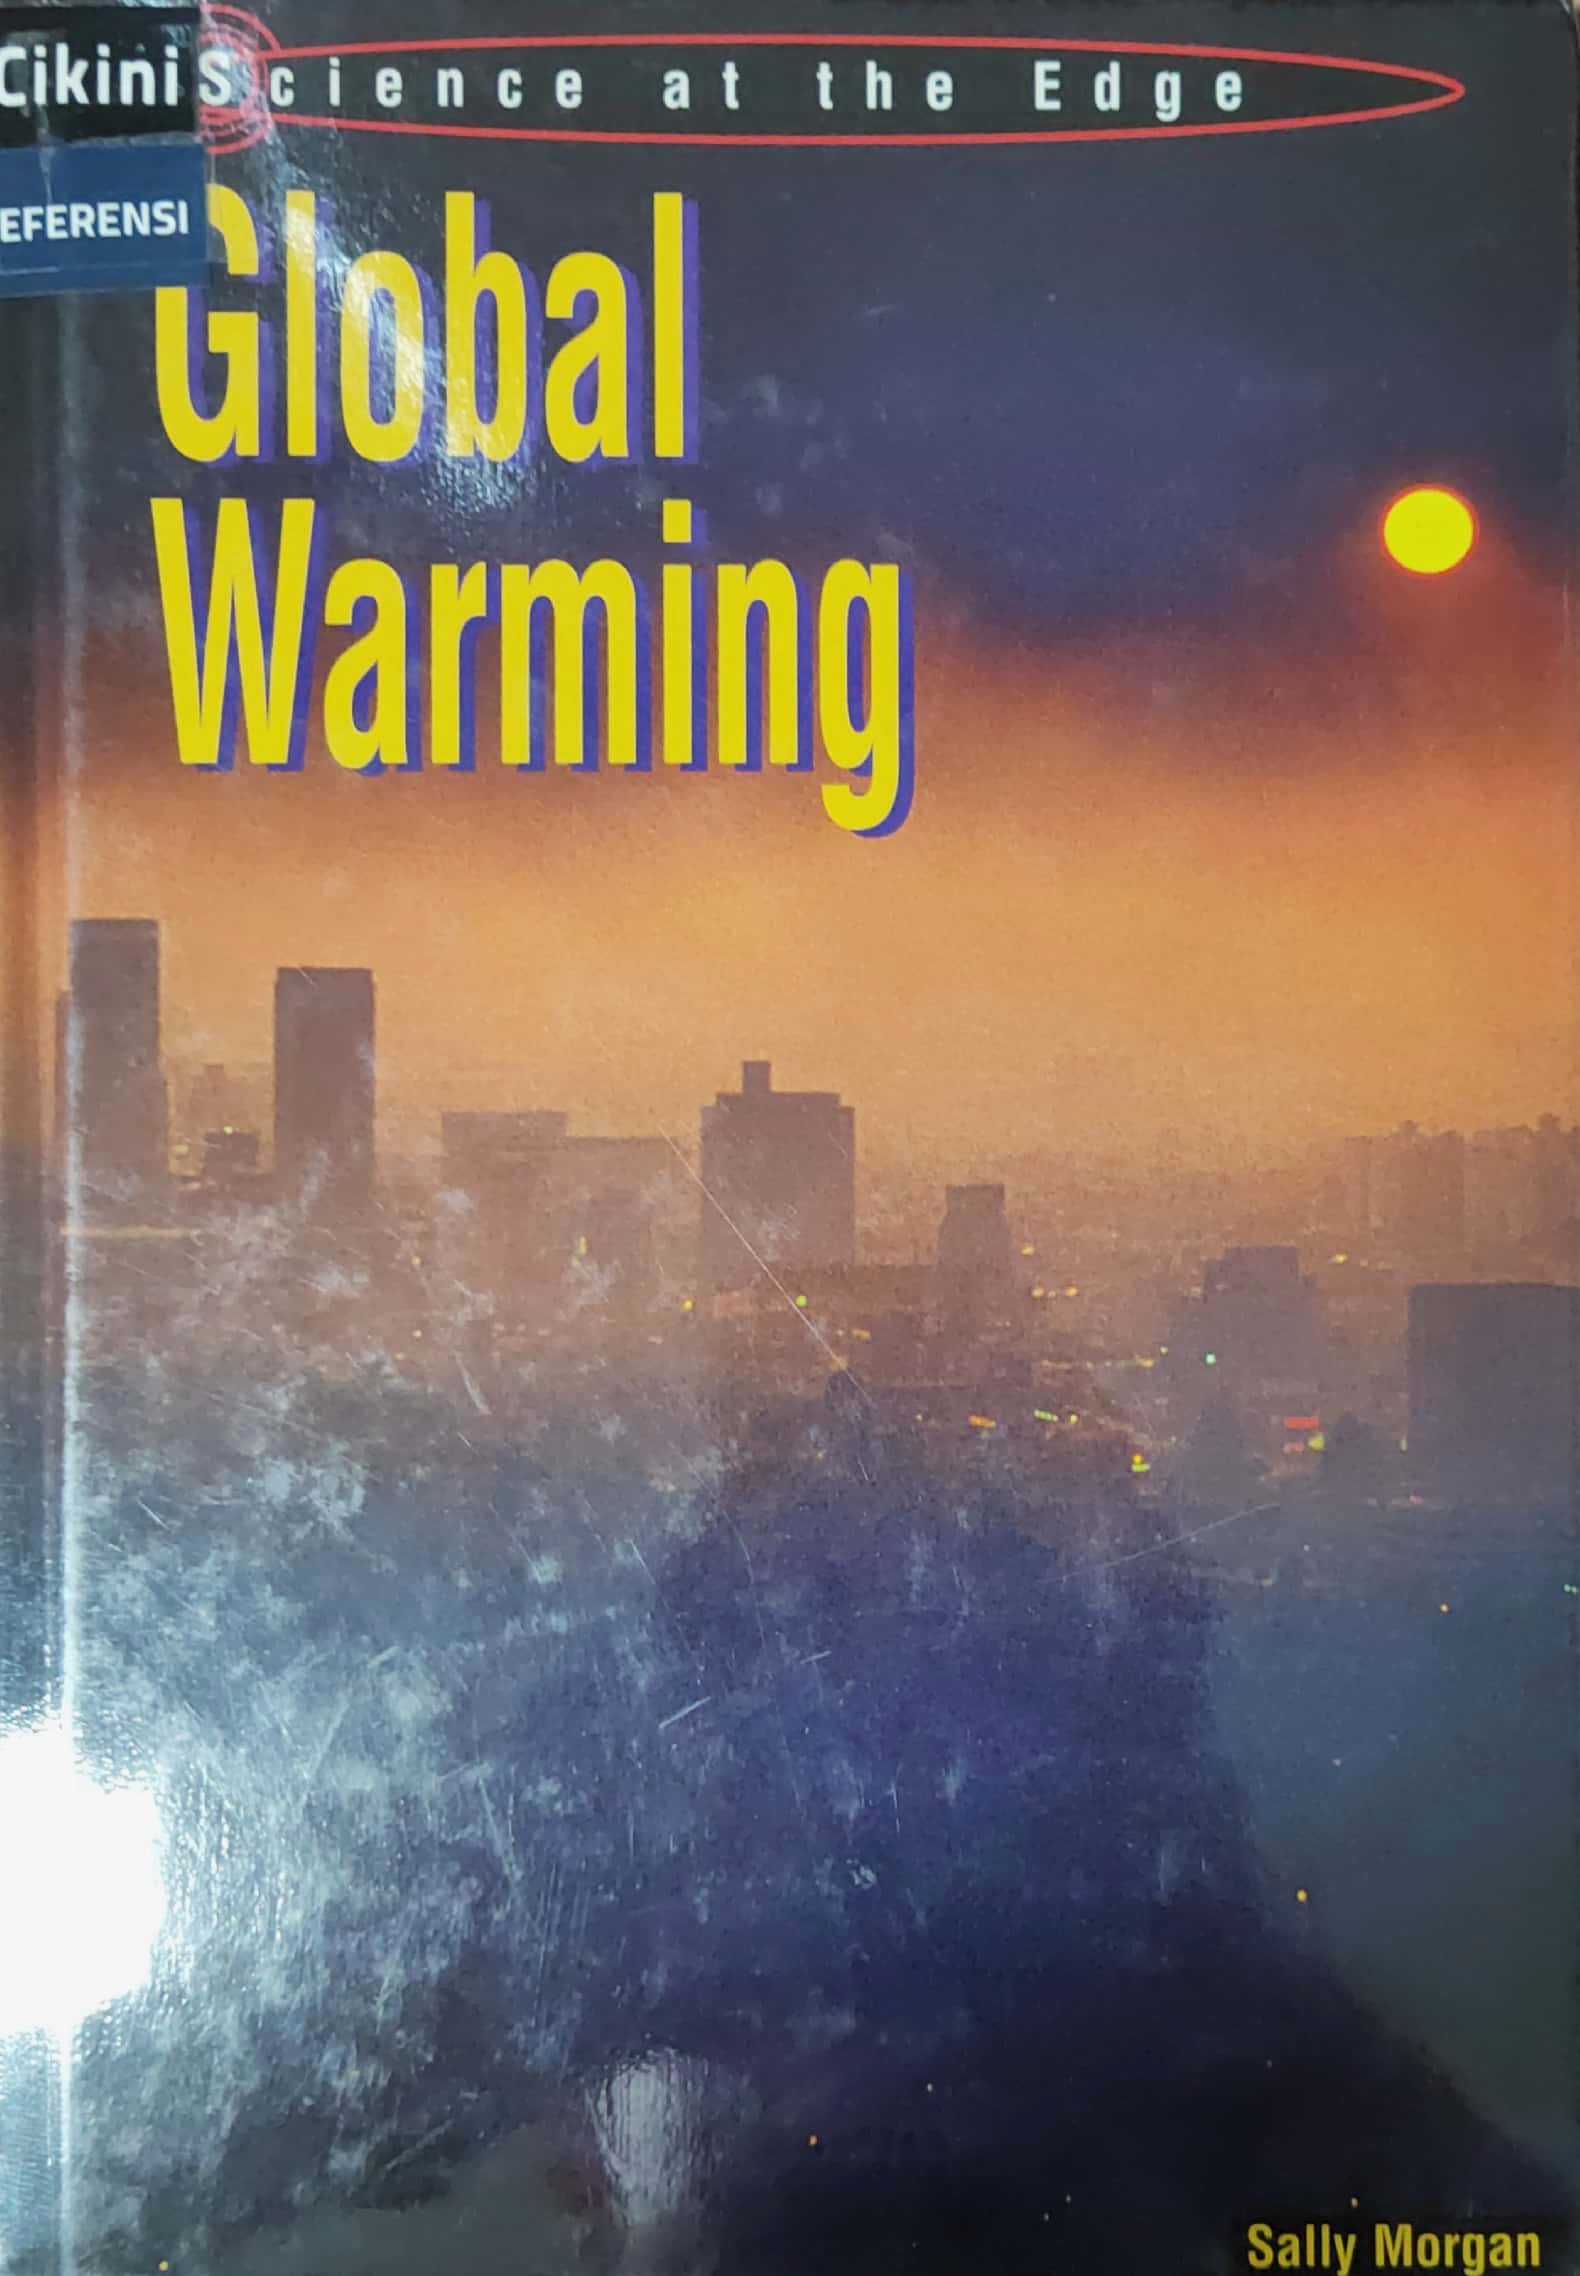 Science at the edge :  global warming